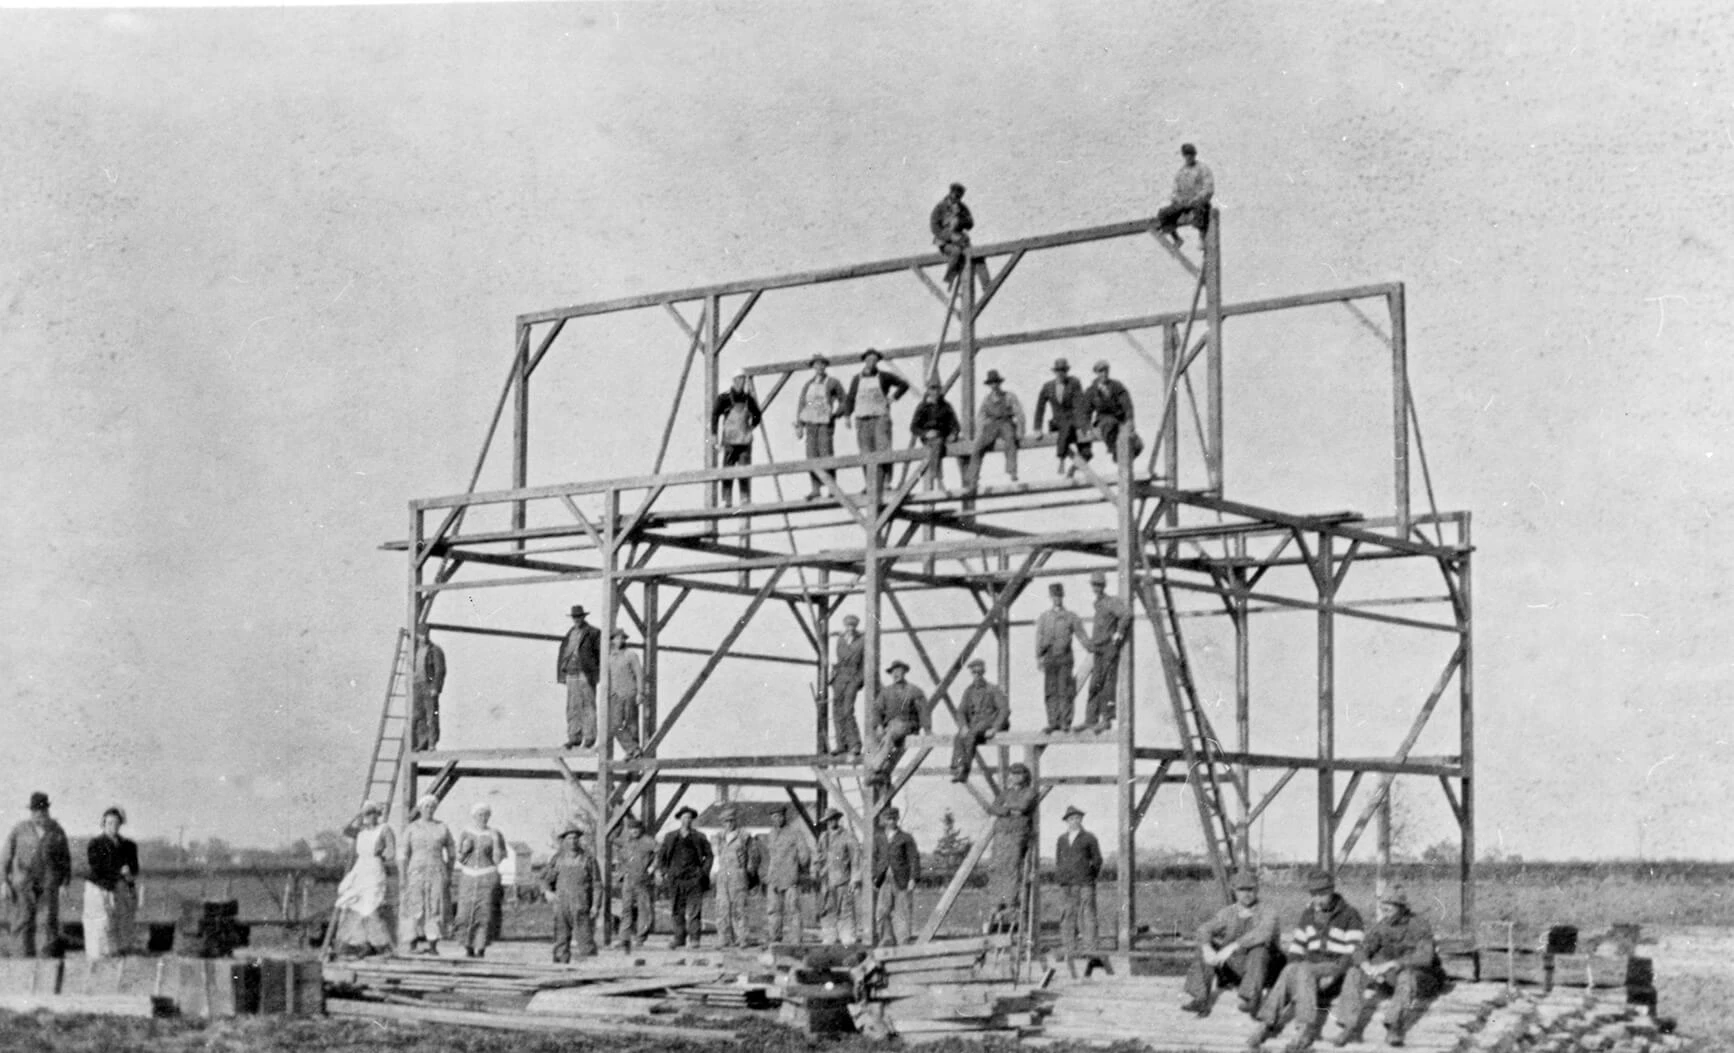 Photograph of a 3-story frame with men standing and sitting all over the frame, and on the ground. Two men are even on the very top of the roof beam... They must have confidence in their construction, that's for sure! There are approx. 25 men in the photo.